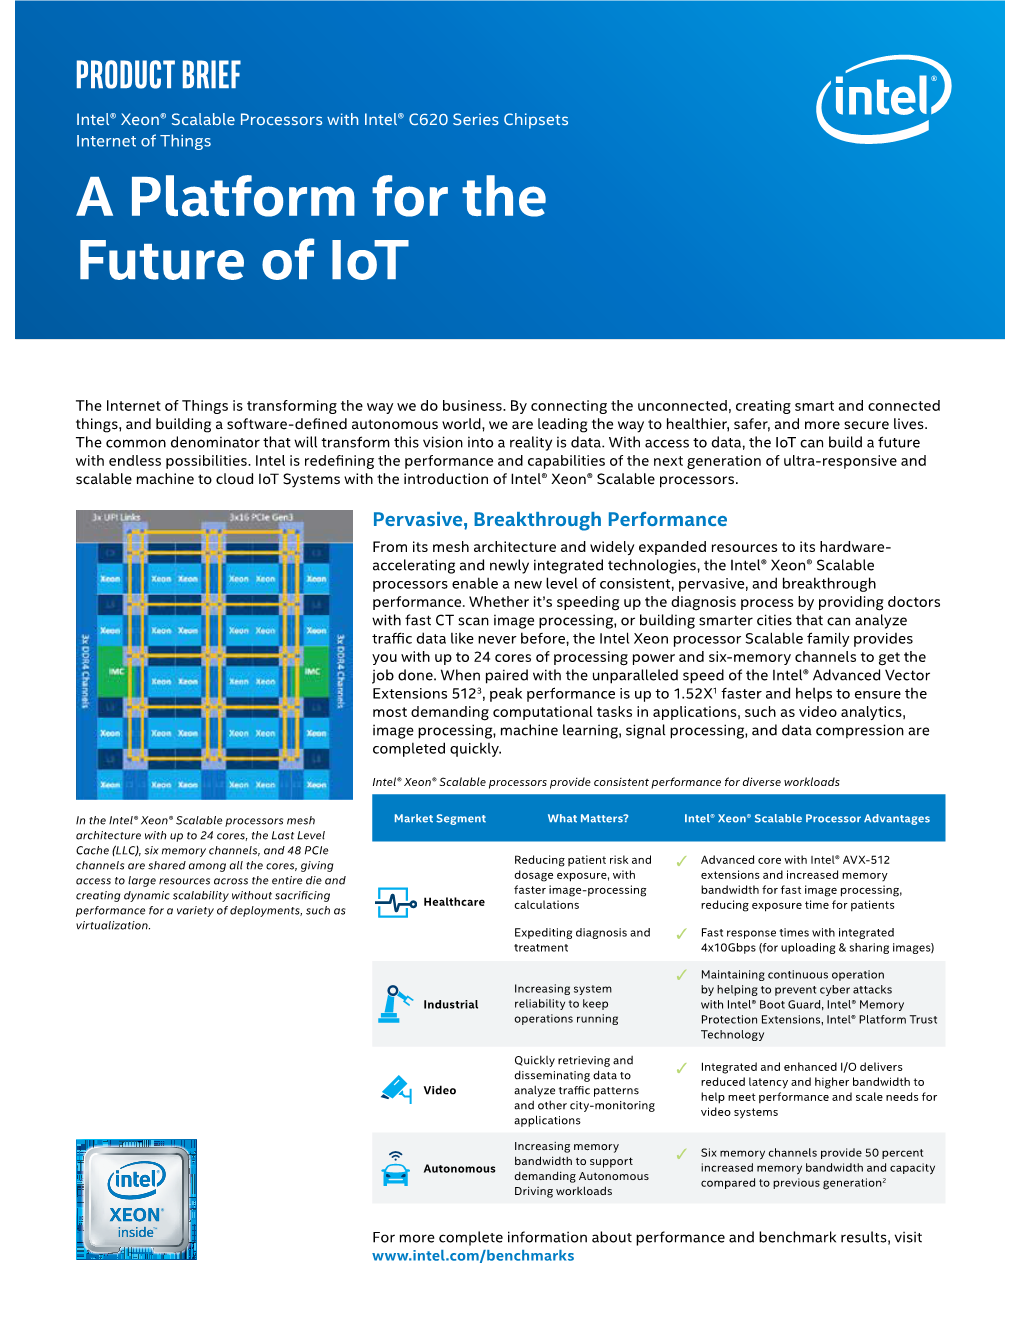 Intel® Xeon® Scalable Processors with Intel® C620 Series Chipsets Internet of Things a Platform for the Future of Iot